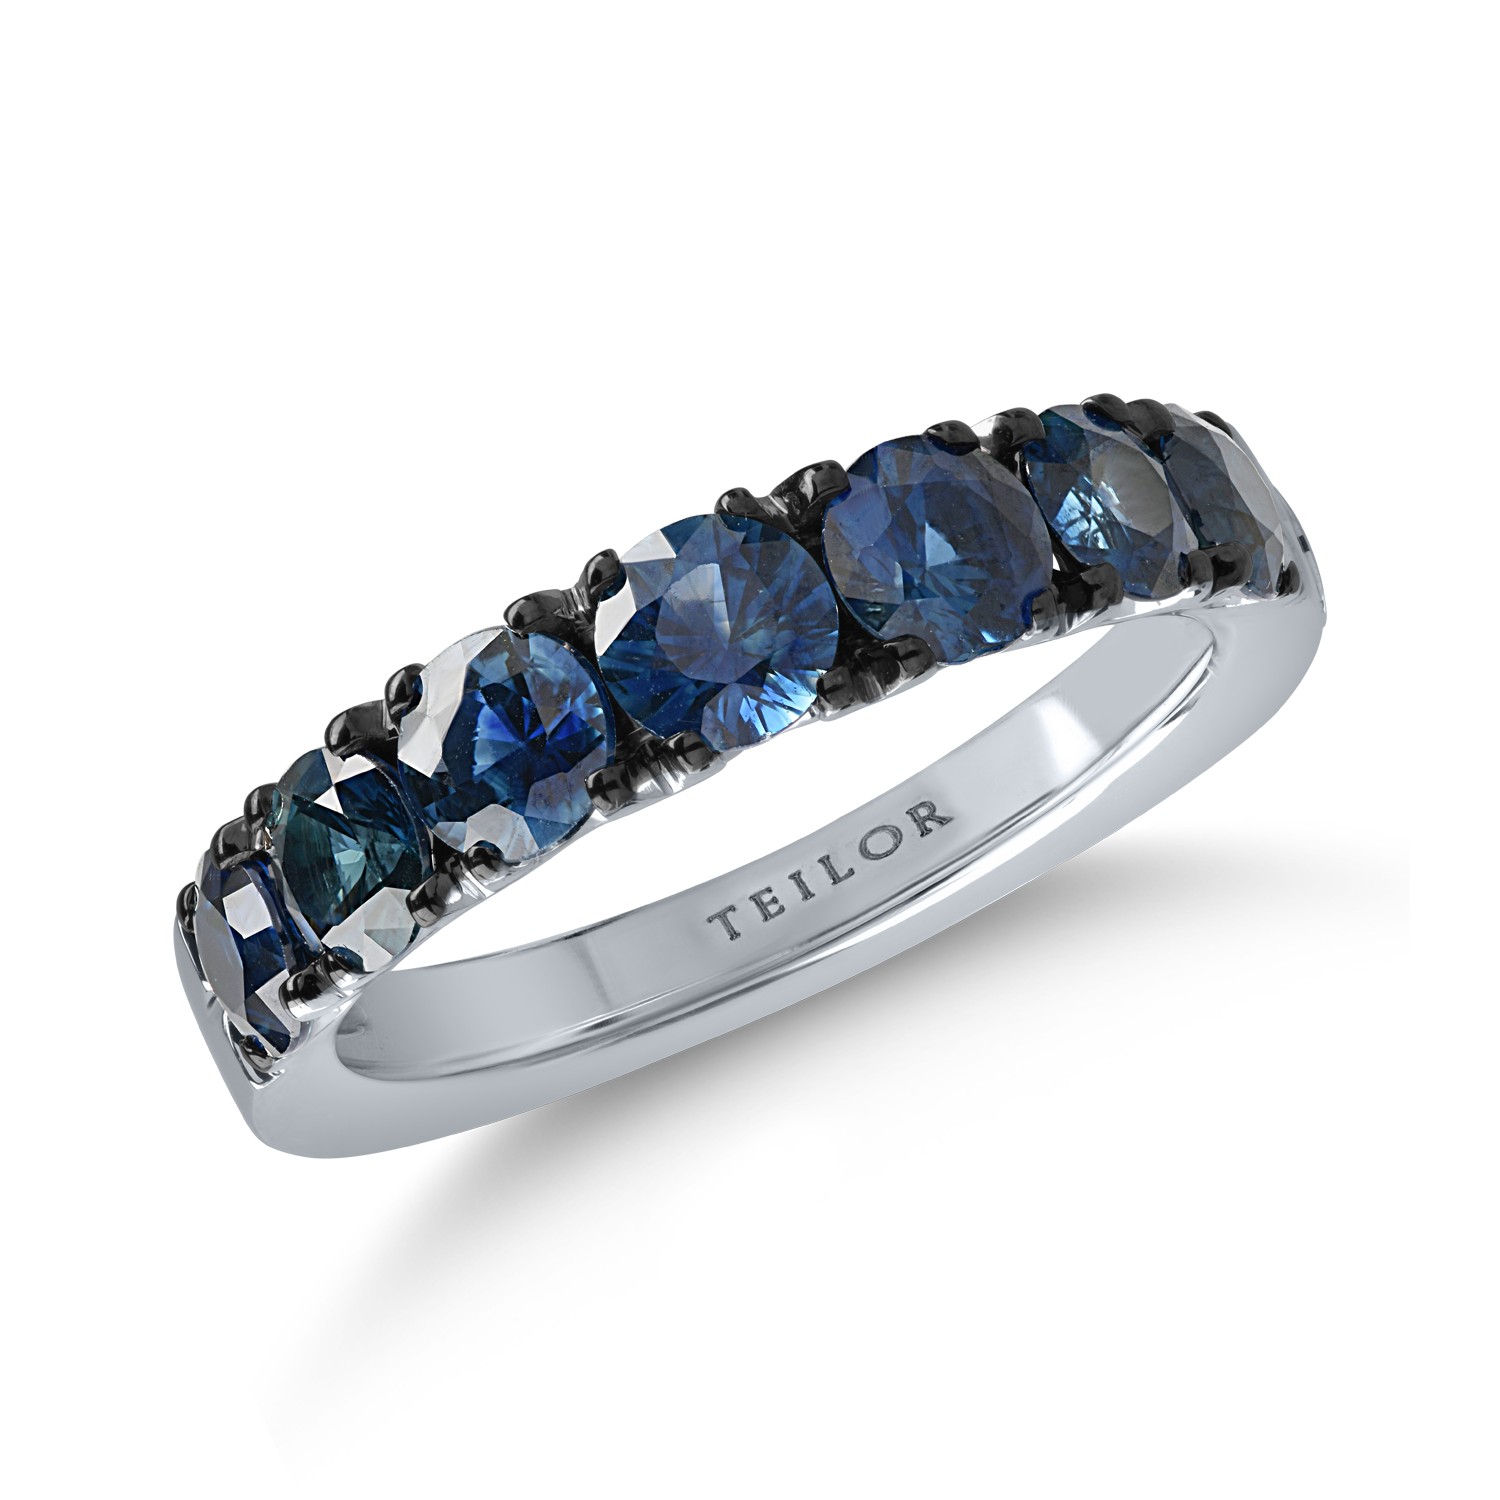 Half eternity ring in white gold with 2.03ct sapphires